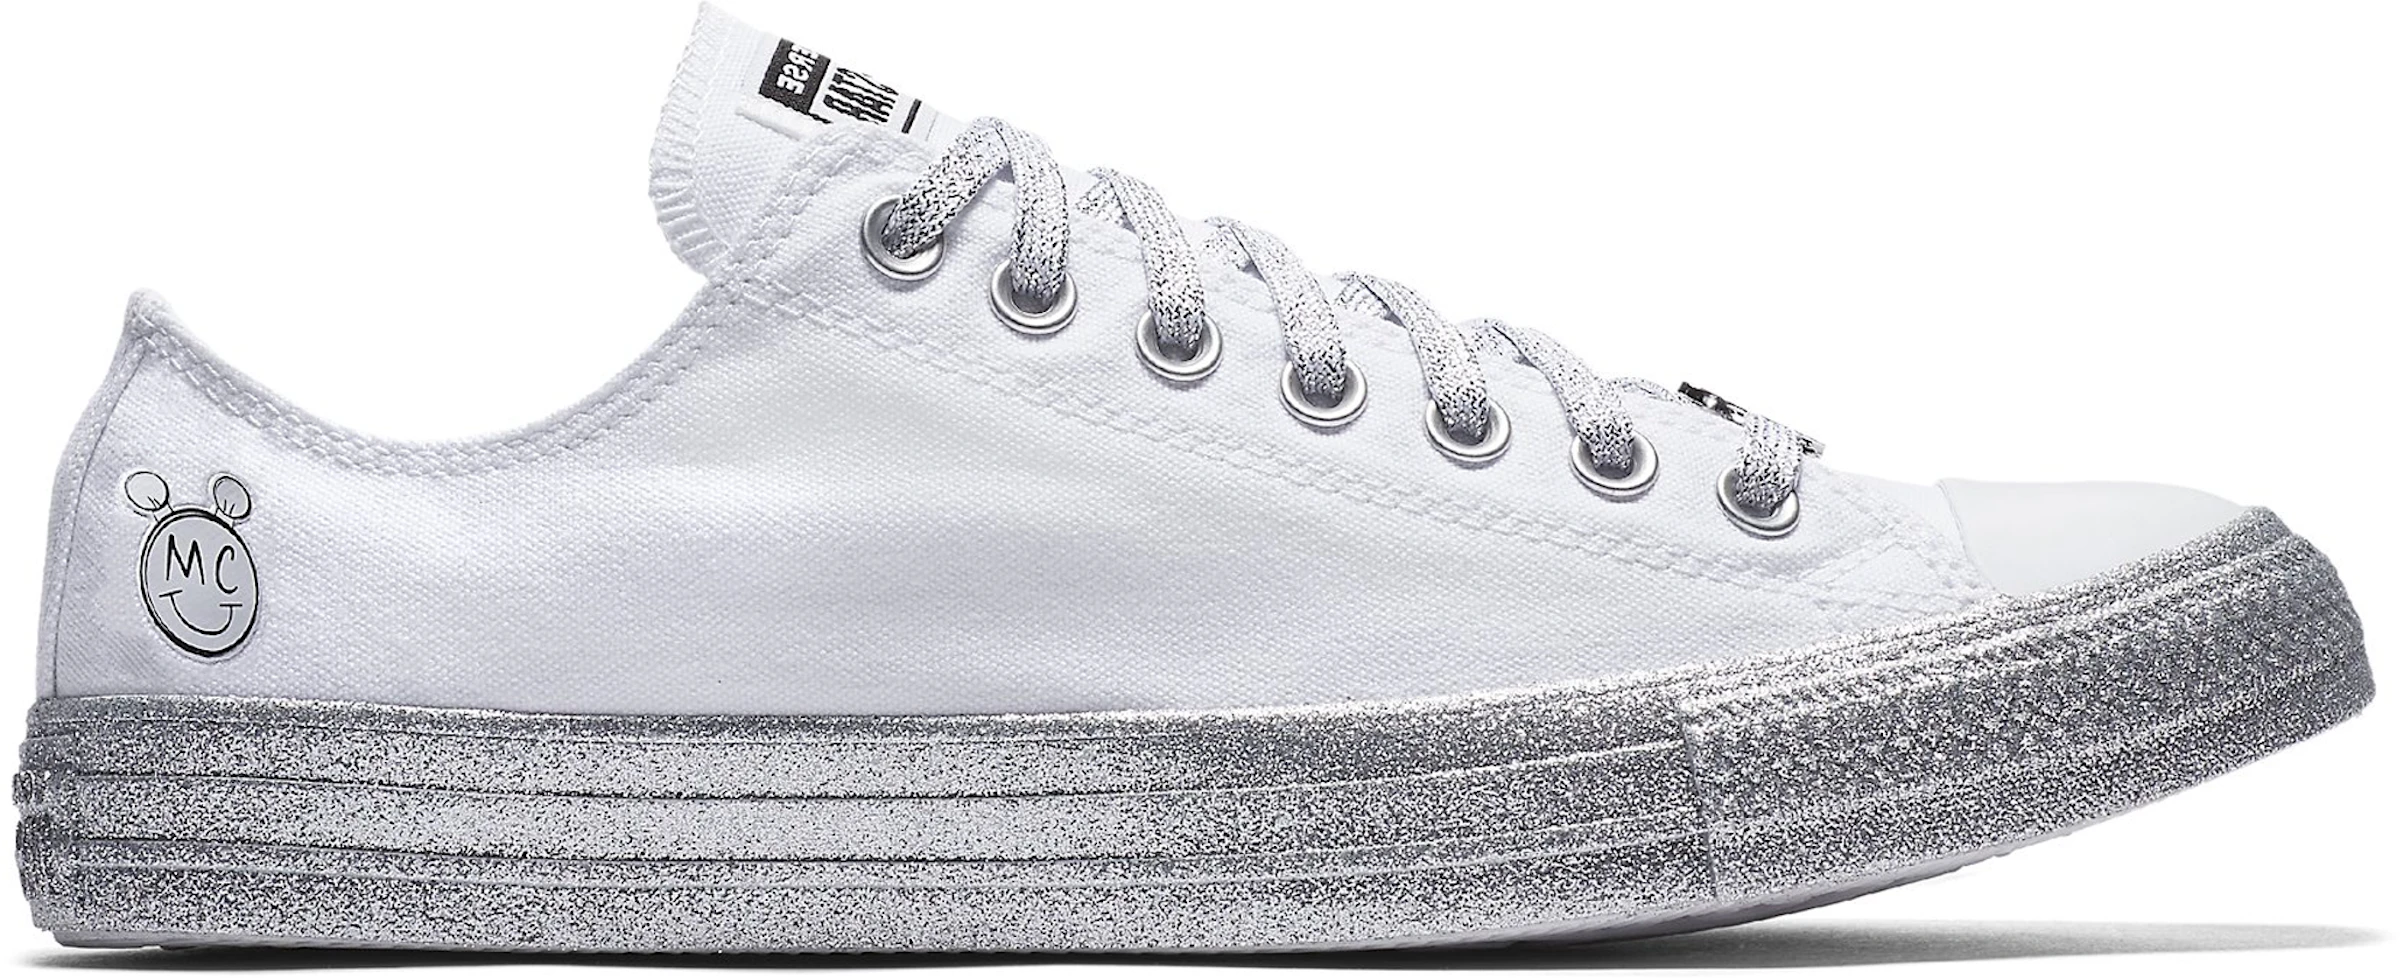 Converse Taylor All-Star Cyrus White - 162238C - US